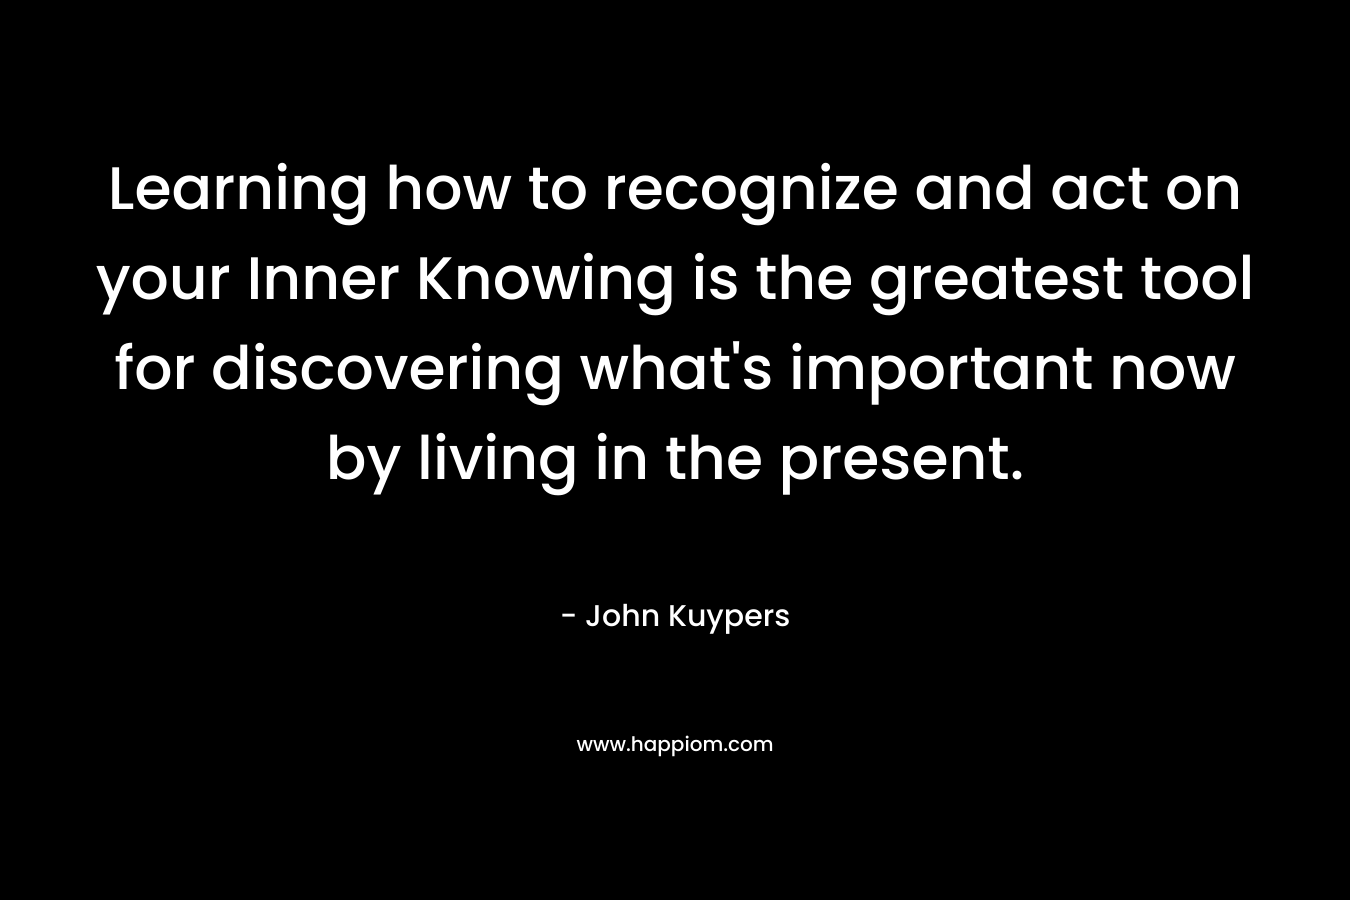 Learning how to recognize and act on your Inner Knowing is the greatest tool for discovering what’s important now by living in the present. – John Kuypers